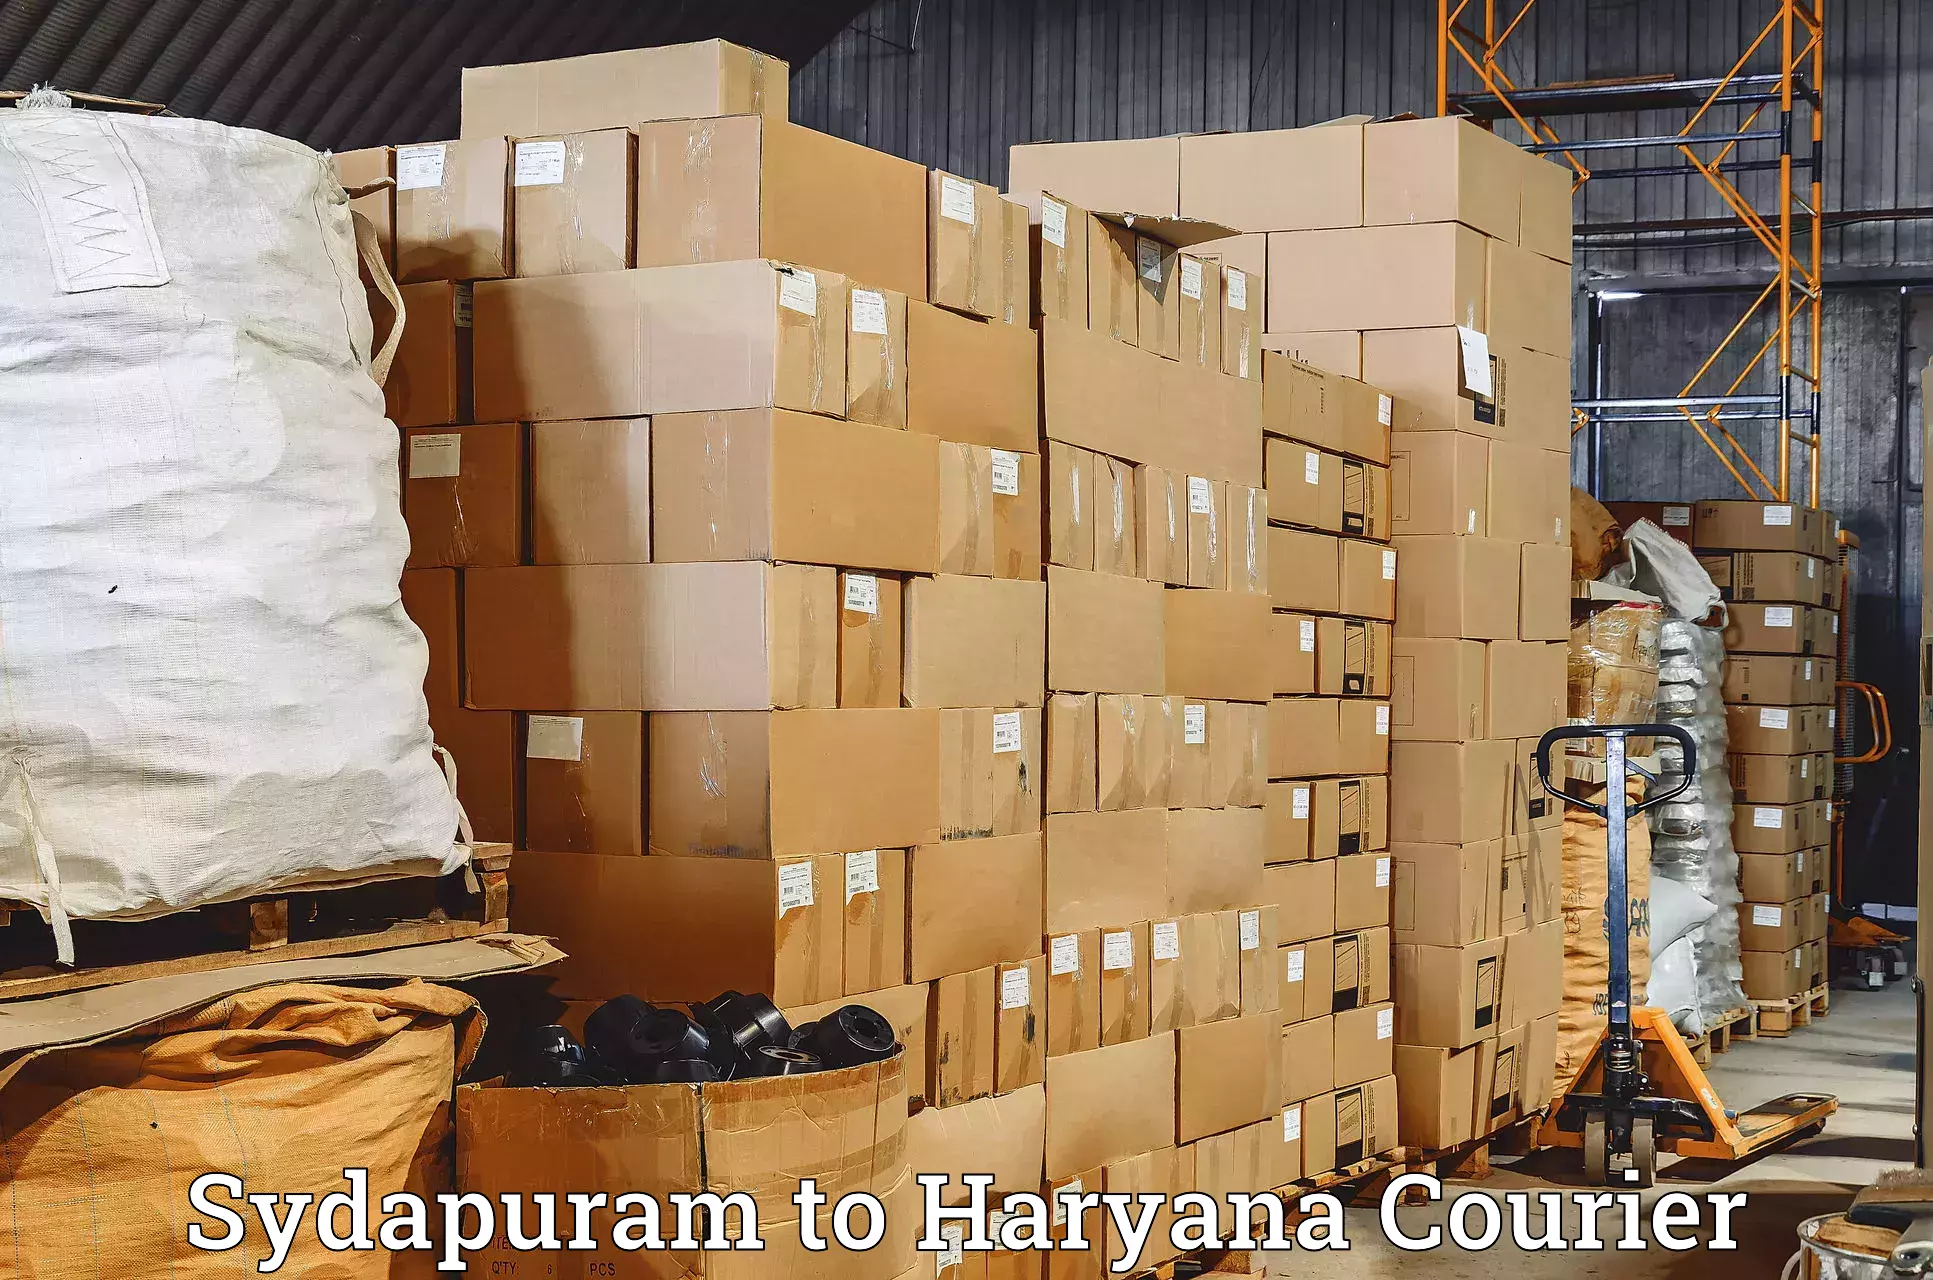 Nationwide parcel services Sydapuram to NCR Haryana